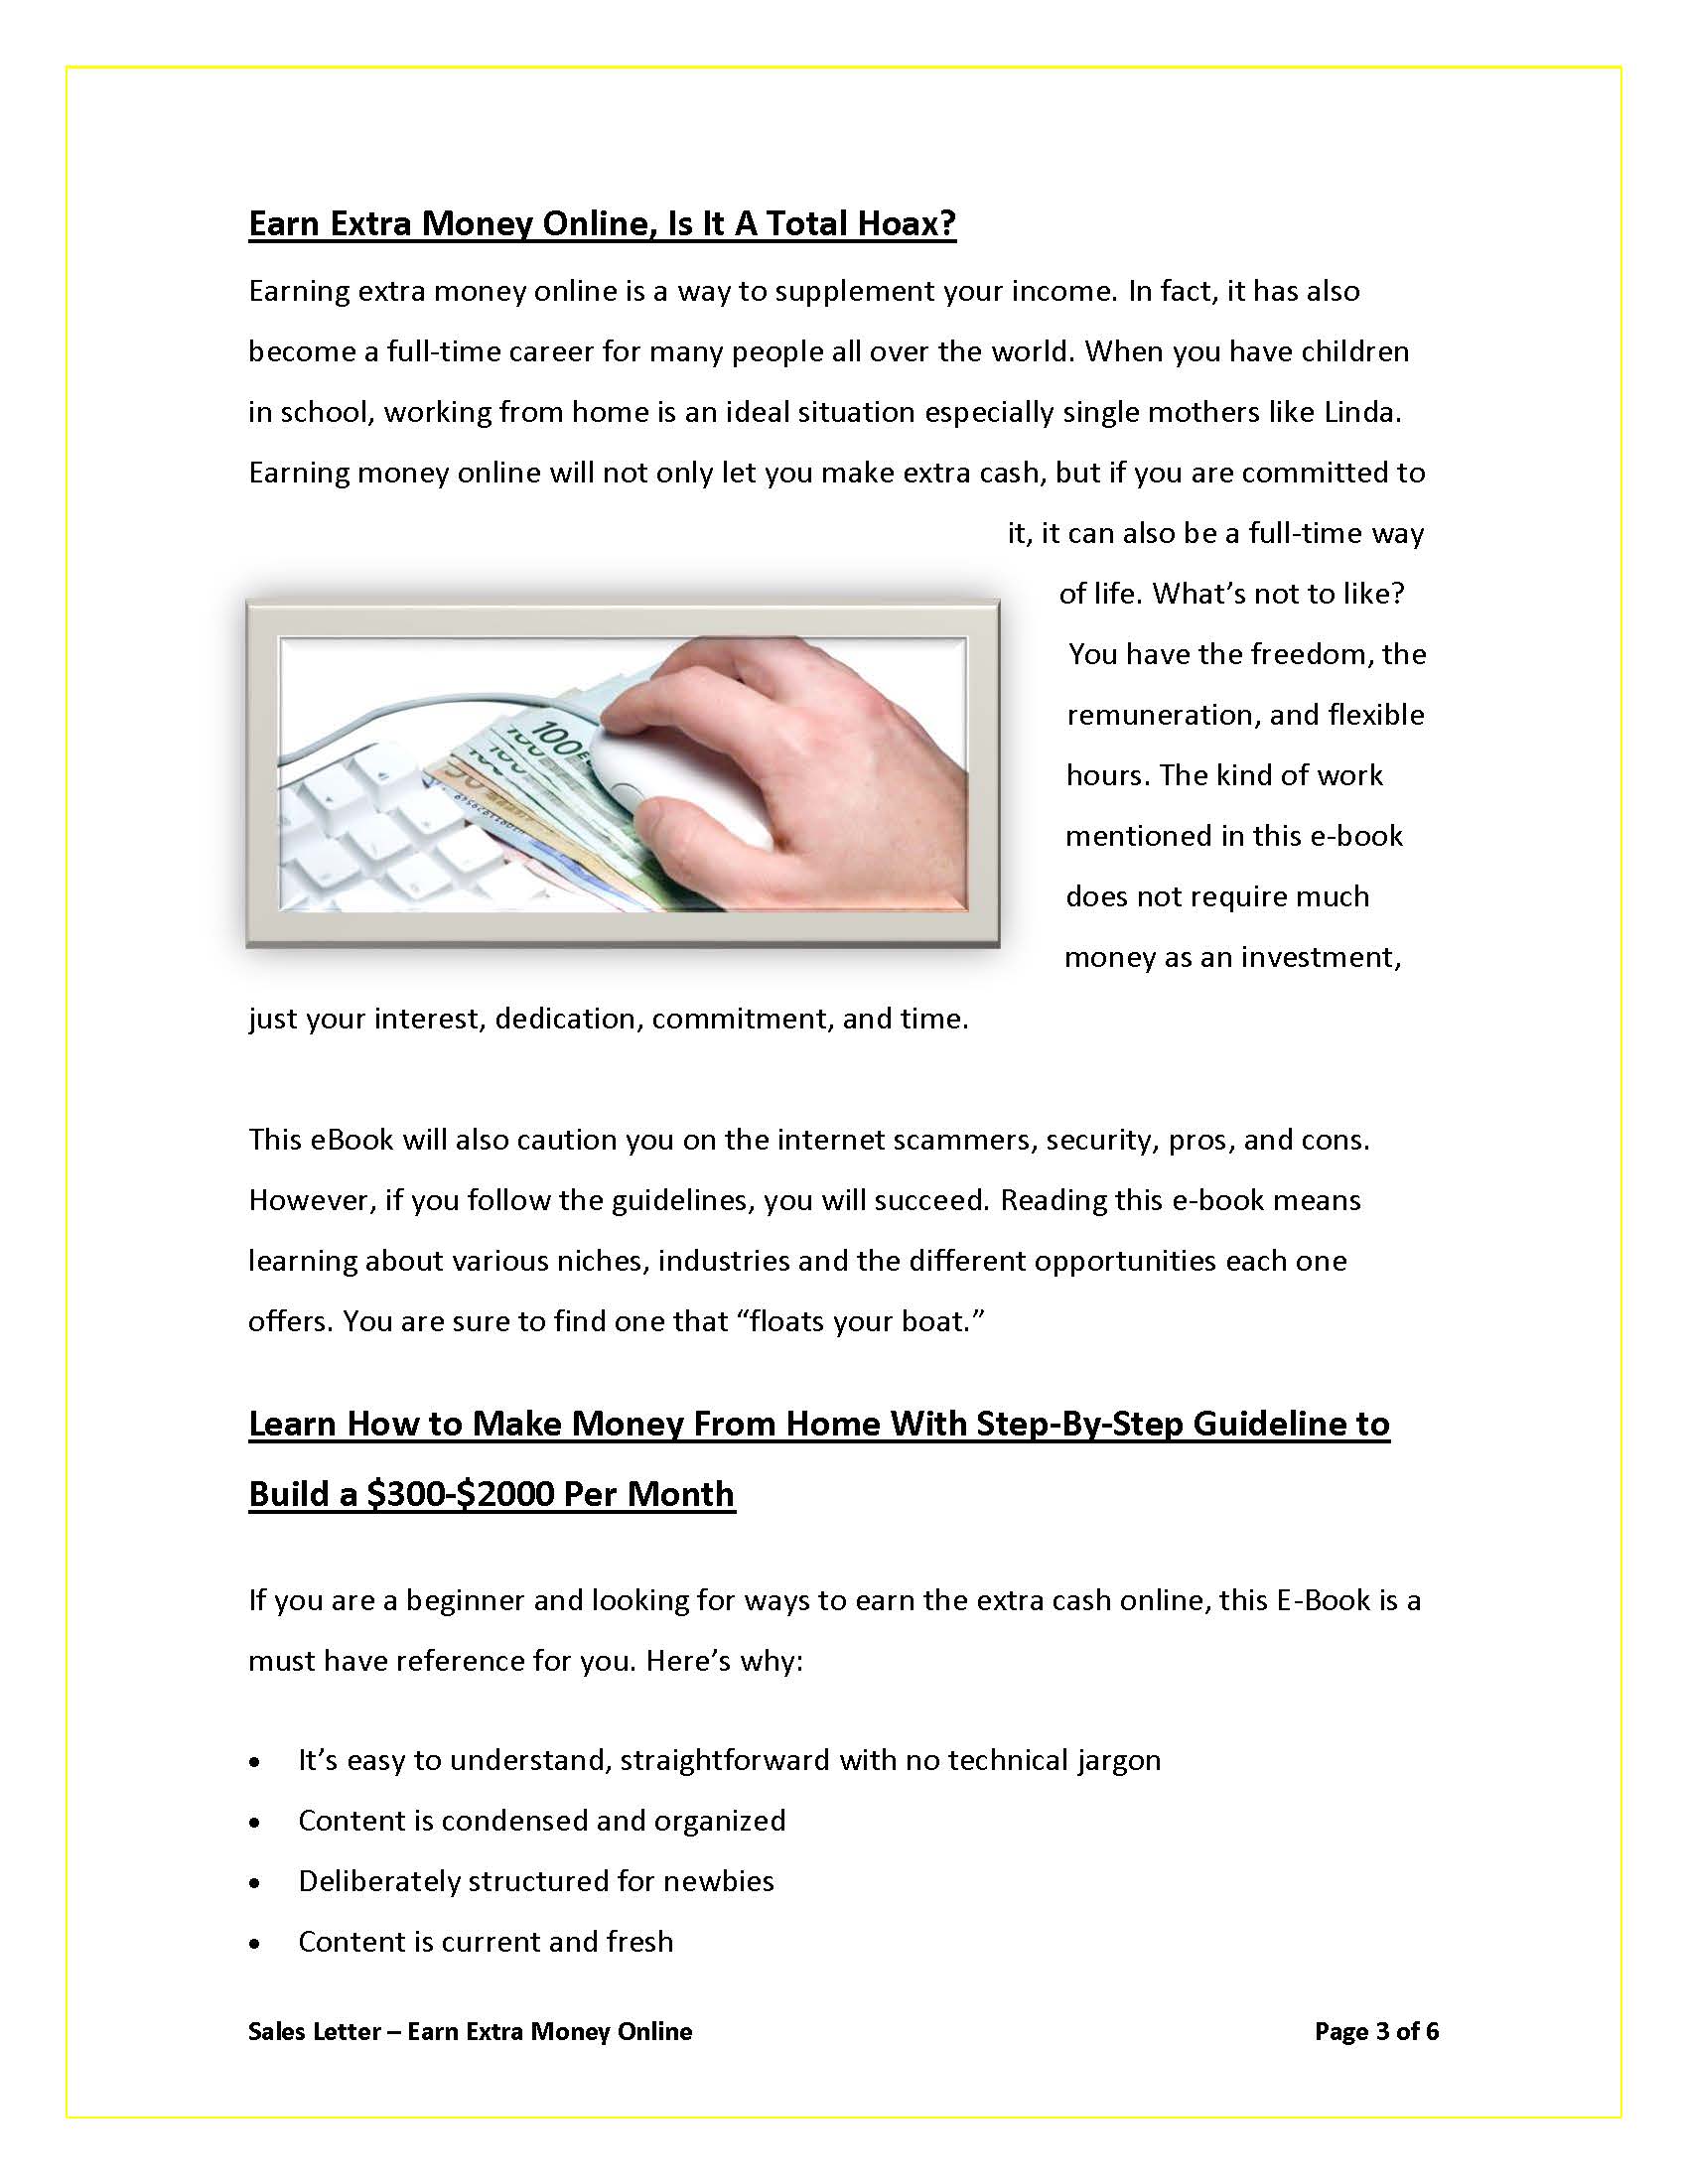 Sales Letter - How To Earn Money Online_Page_3